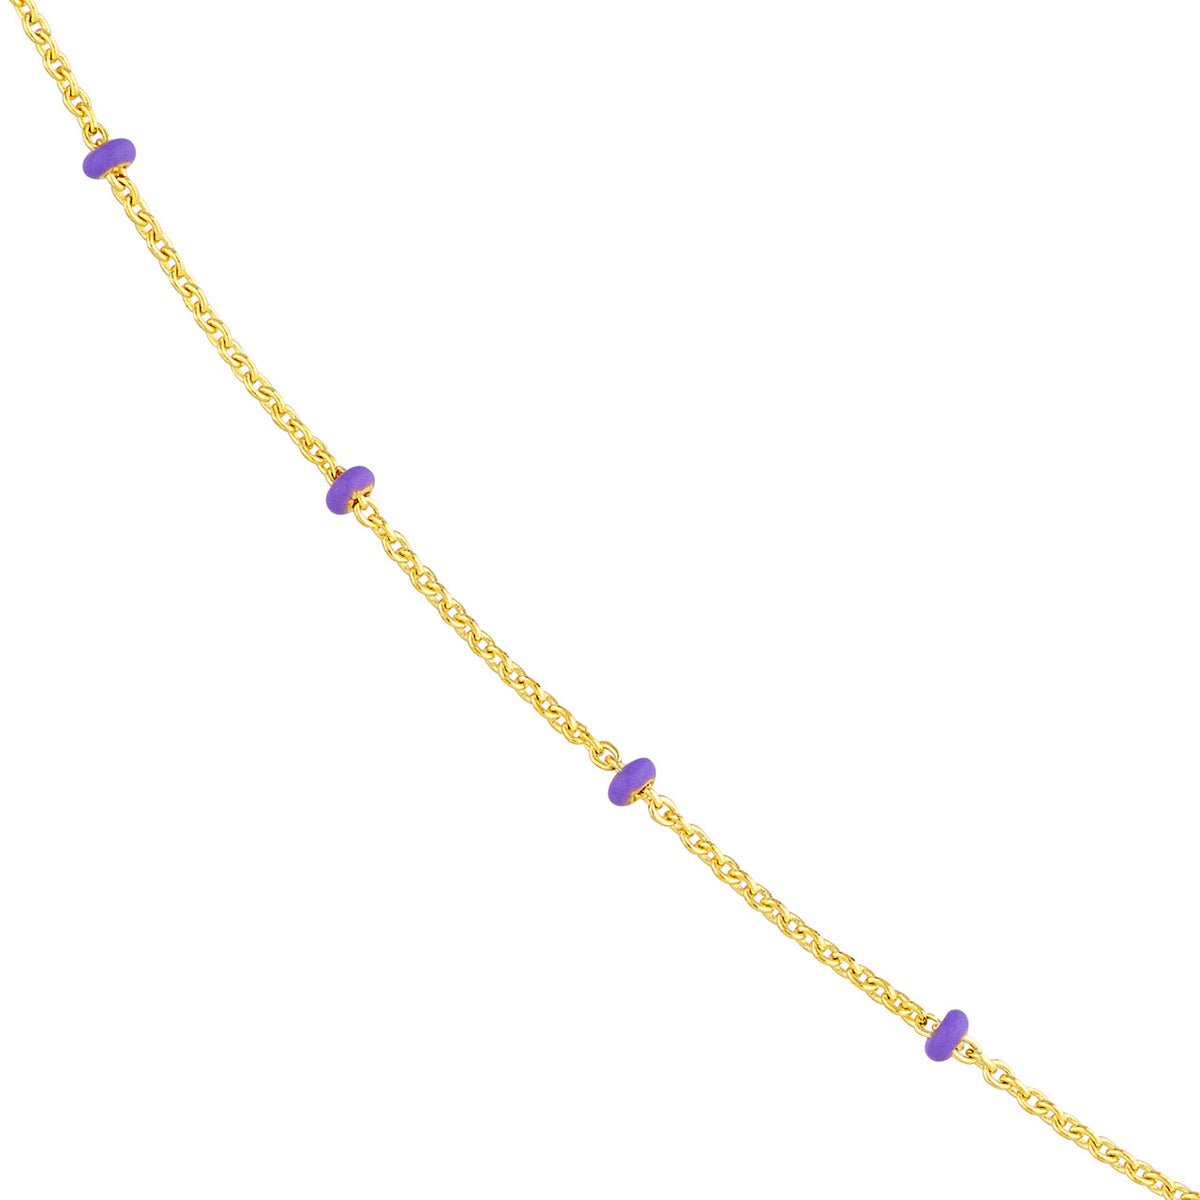 14K Yellow Gold Lilac Enamel Bead Saturn Chain Necklace